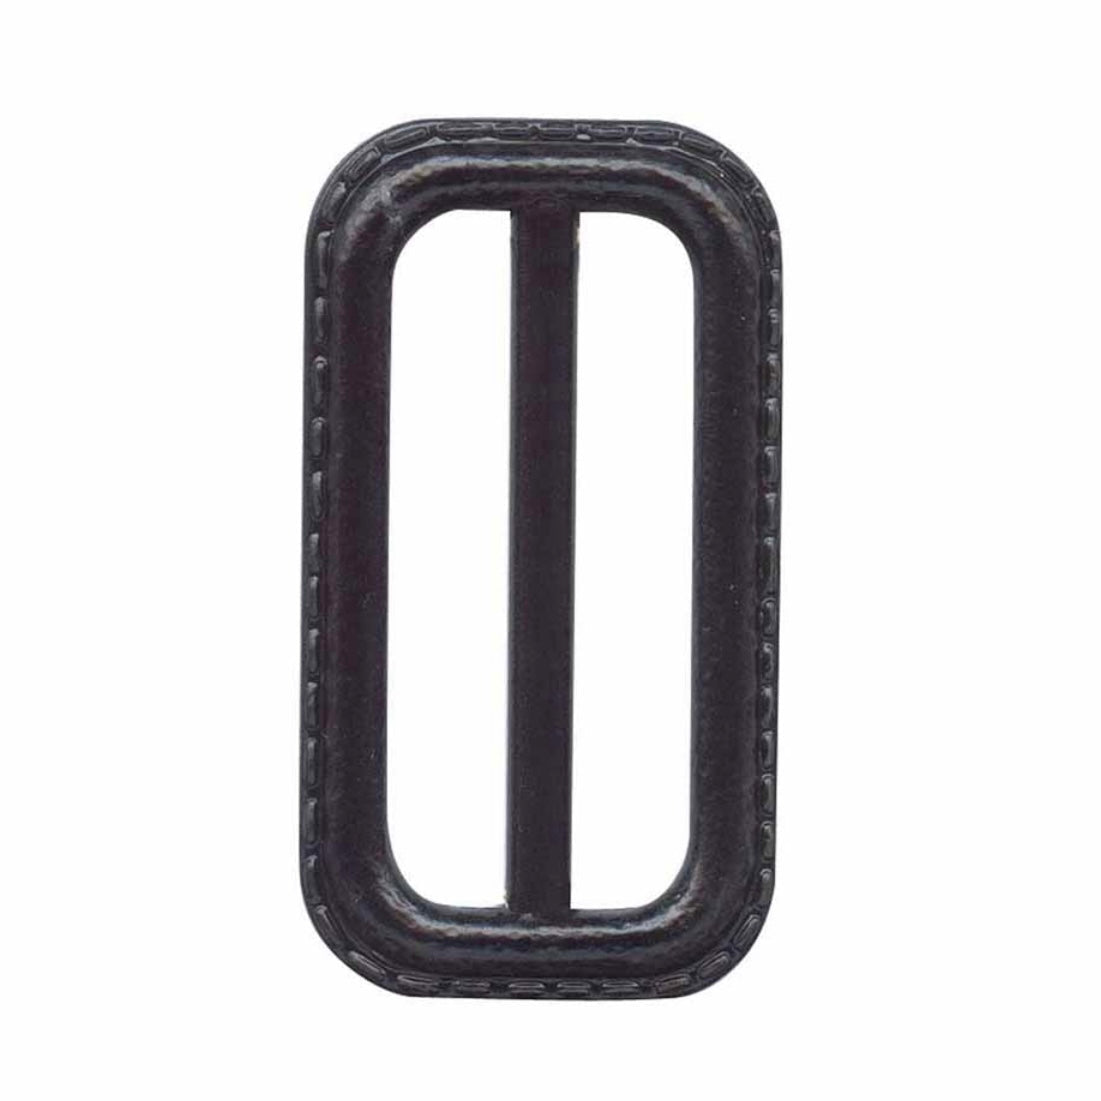 Trench Buckle - 25mm (1″) - Black Patent - 2pcs